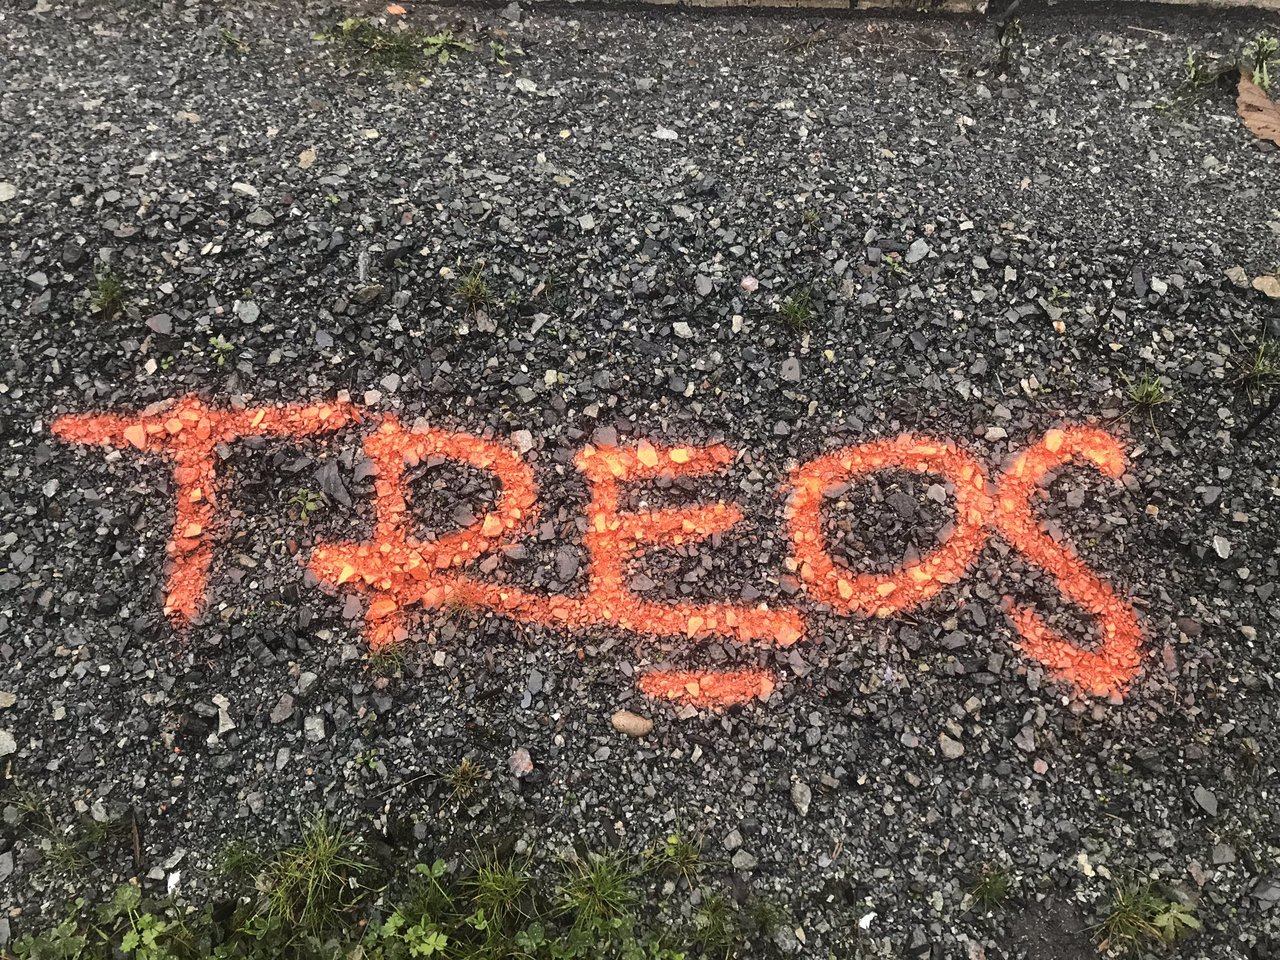 When you find yourself at work in the pouring rain with spray paint and a fresh pallet.... @TreosOfficial is coming  #TREOS $TRO $GCR #Stability #StableToken #Gold $BTC $ETH $LTC #Bitcoin #CryptoNews #Graf #Graffiti #BTCArt #StreetArt #Tagger #Tag https://t.co/YBjrtBDYg9